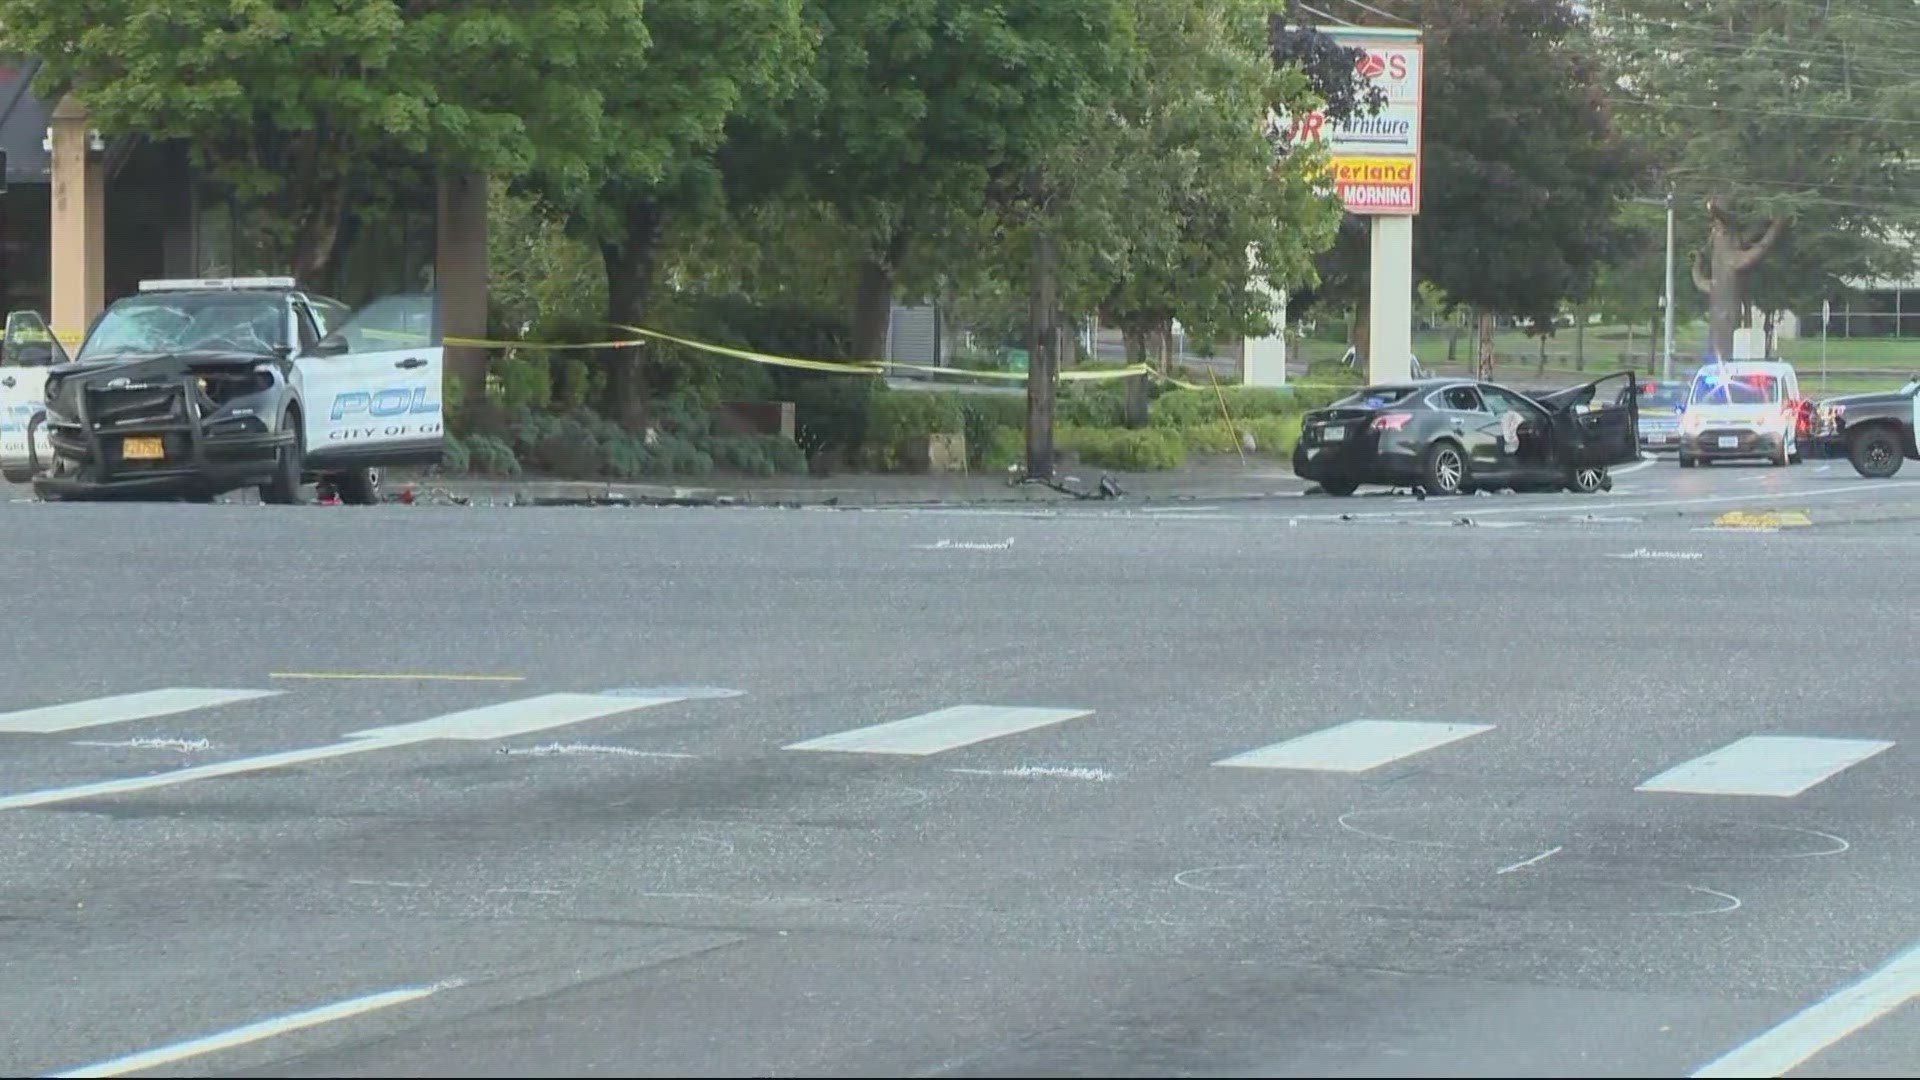 Four people including a police officer were taken to the hospital after a crash in Gresham early Friday morning.